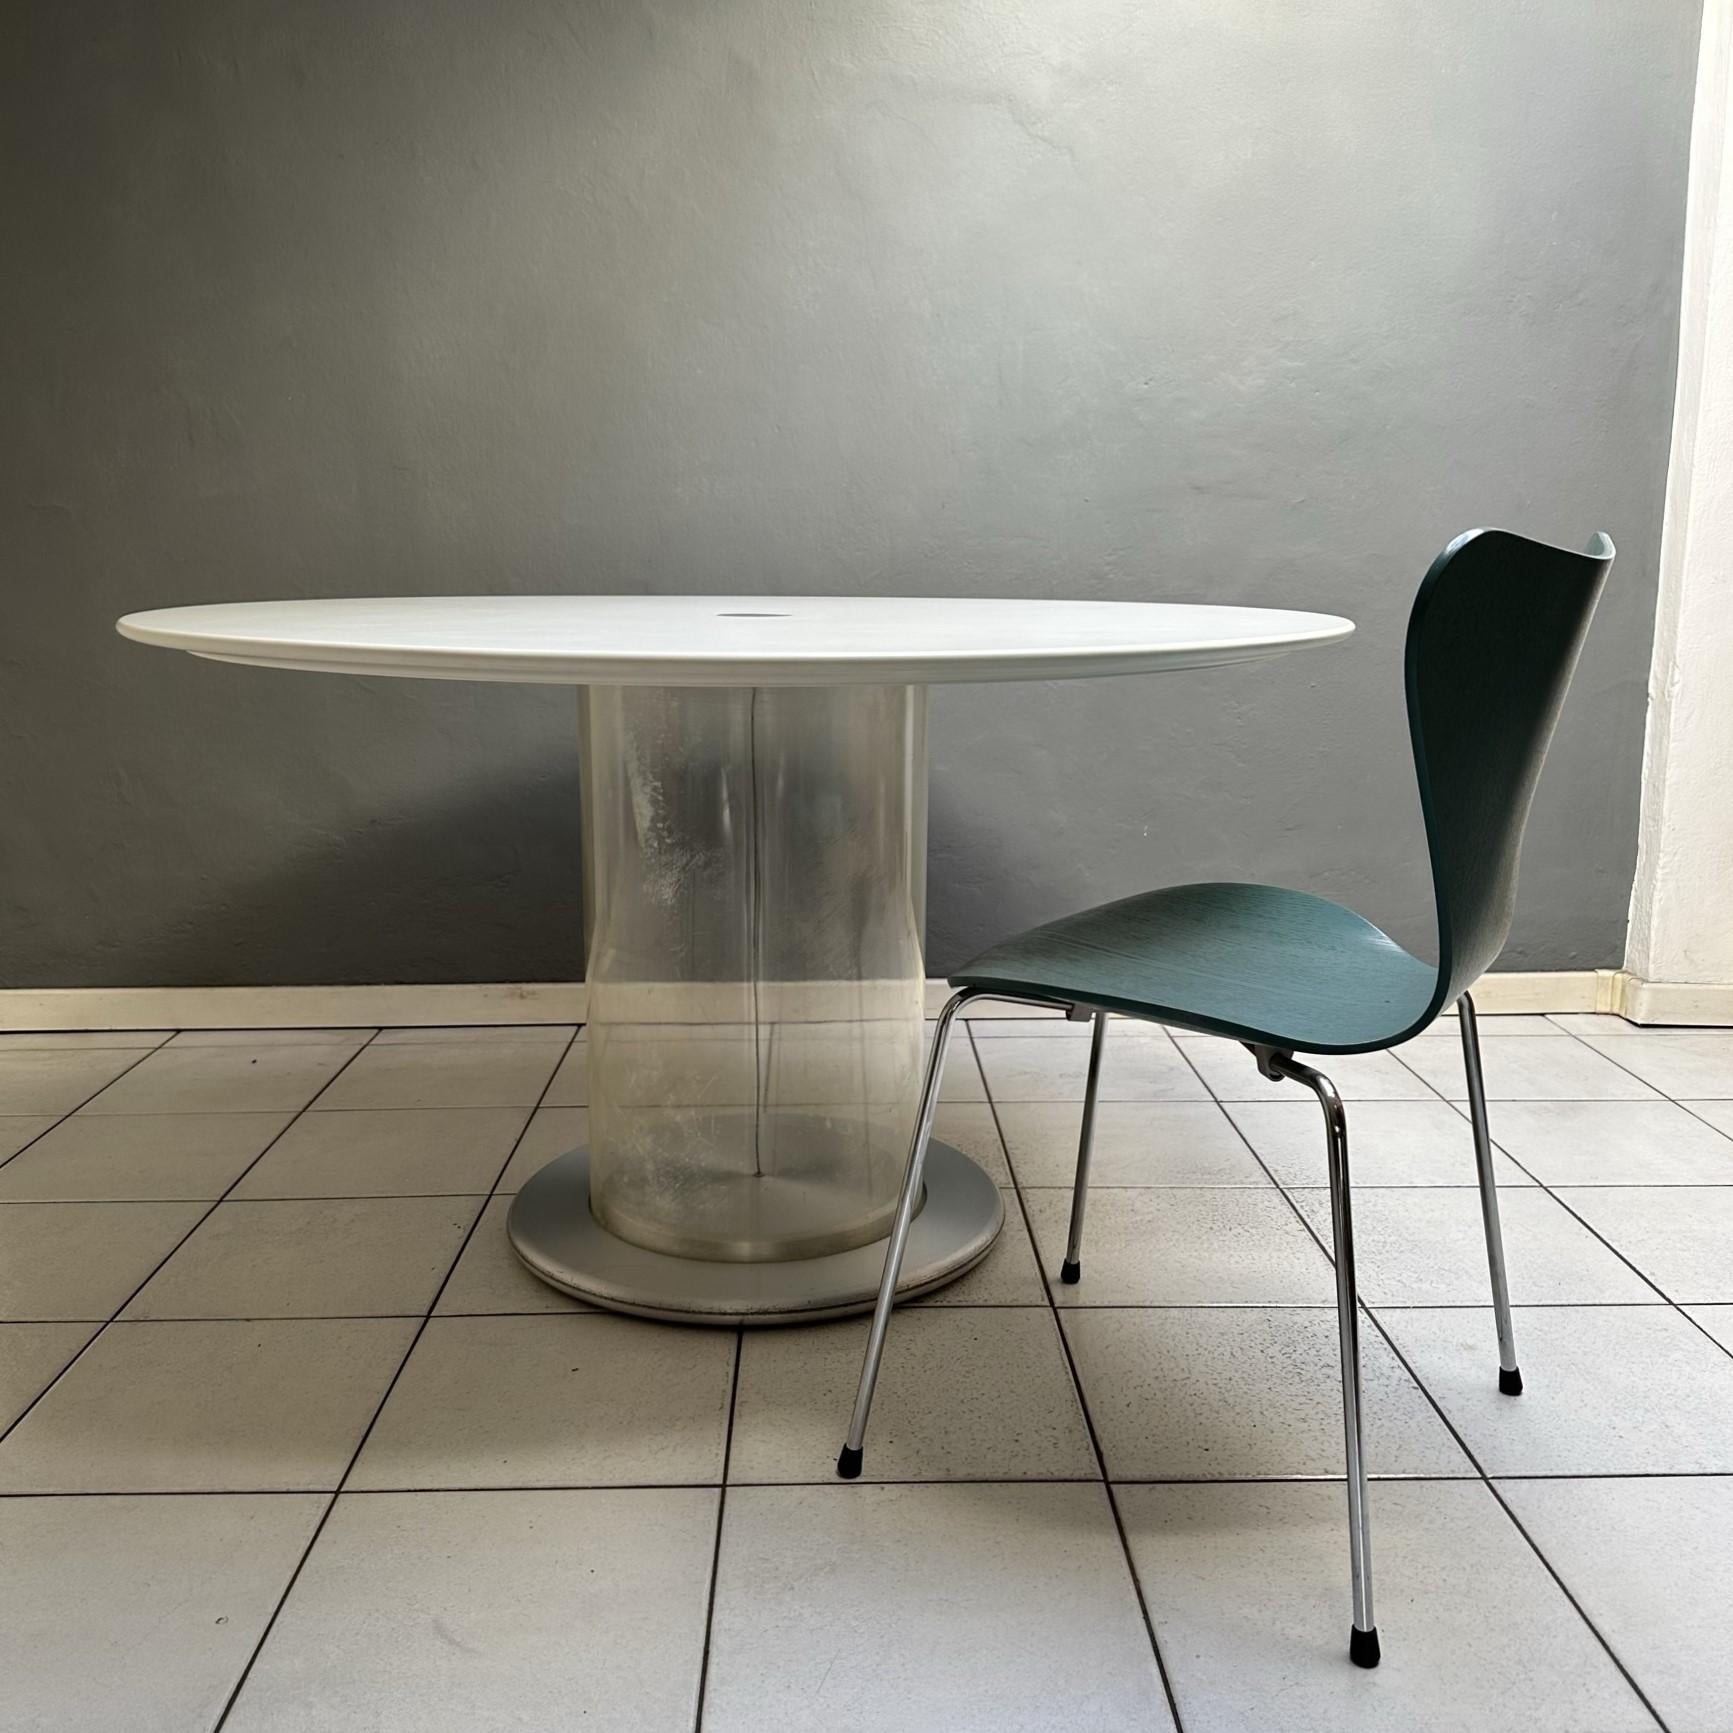 Italian 19thMid-Century Modern, round Eclissi Table, by Claudio Salocchi, white wood top